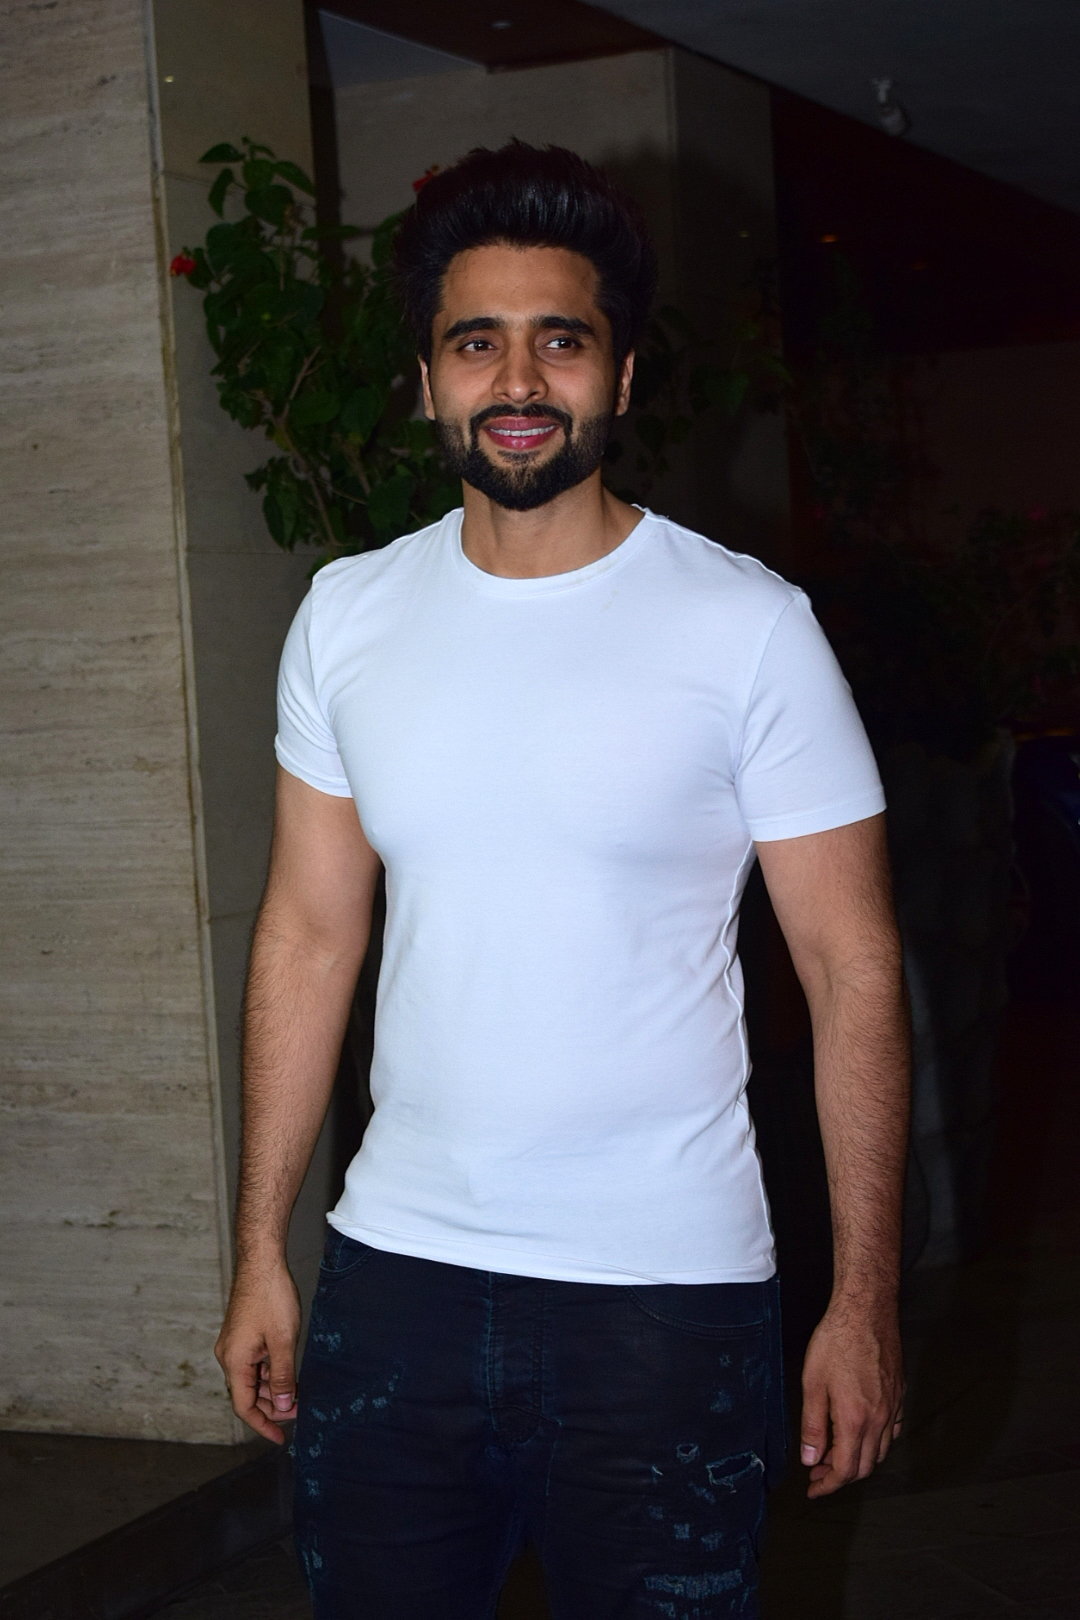 Jackky Bhagnani - Photos: Coolie No 1 Wrap Up Party At Jackky Bhagnani's House | Picture 1724270